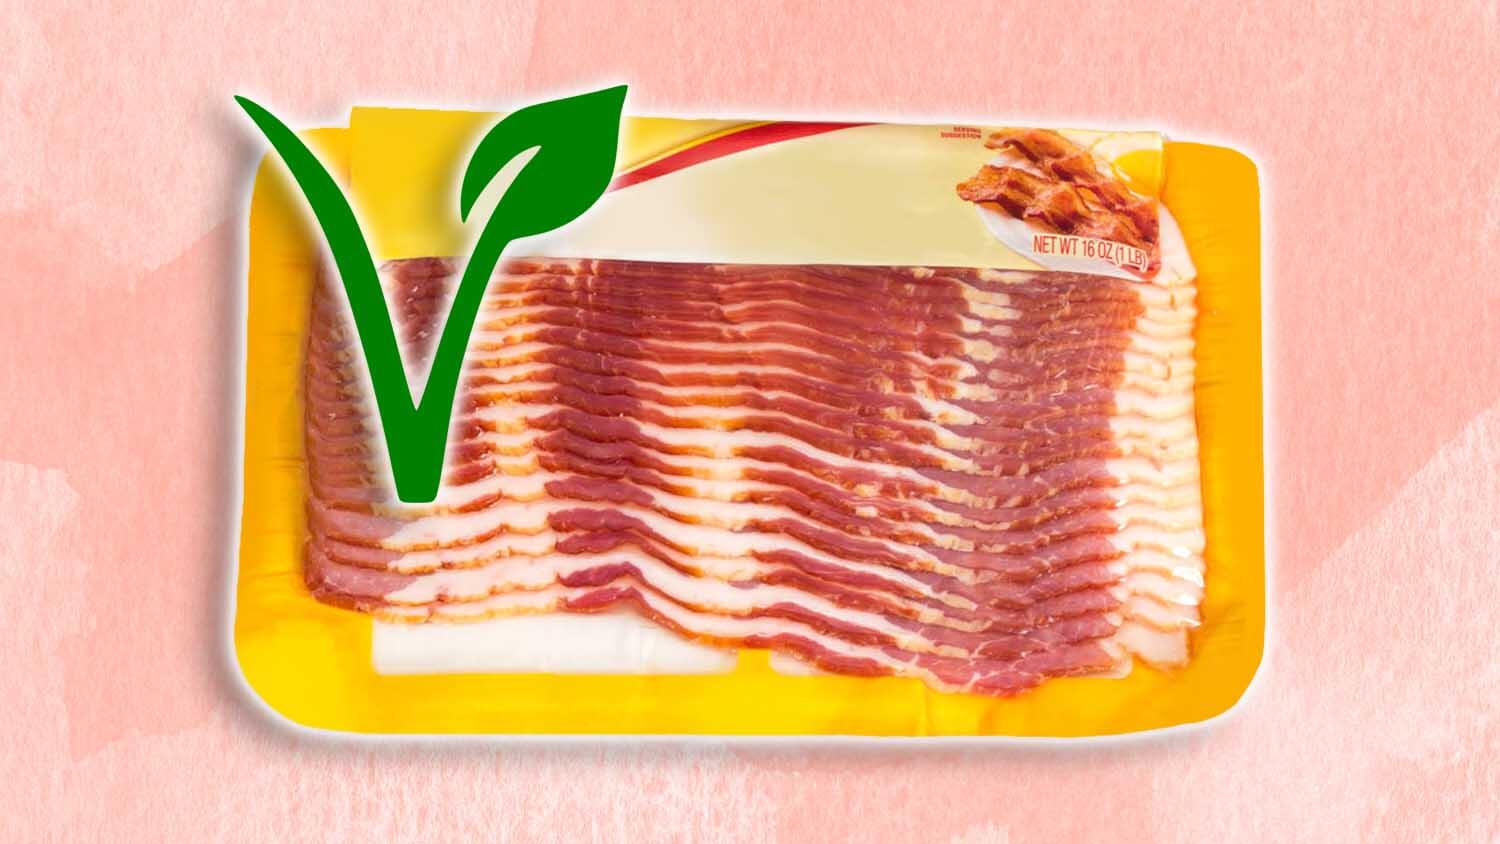 Vegan Bacon, Chicken, and Sausage Are Coming to Nestlé